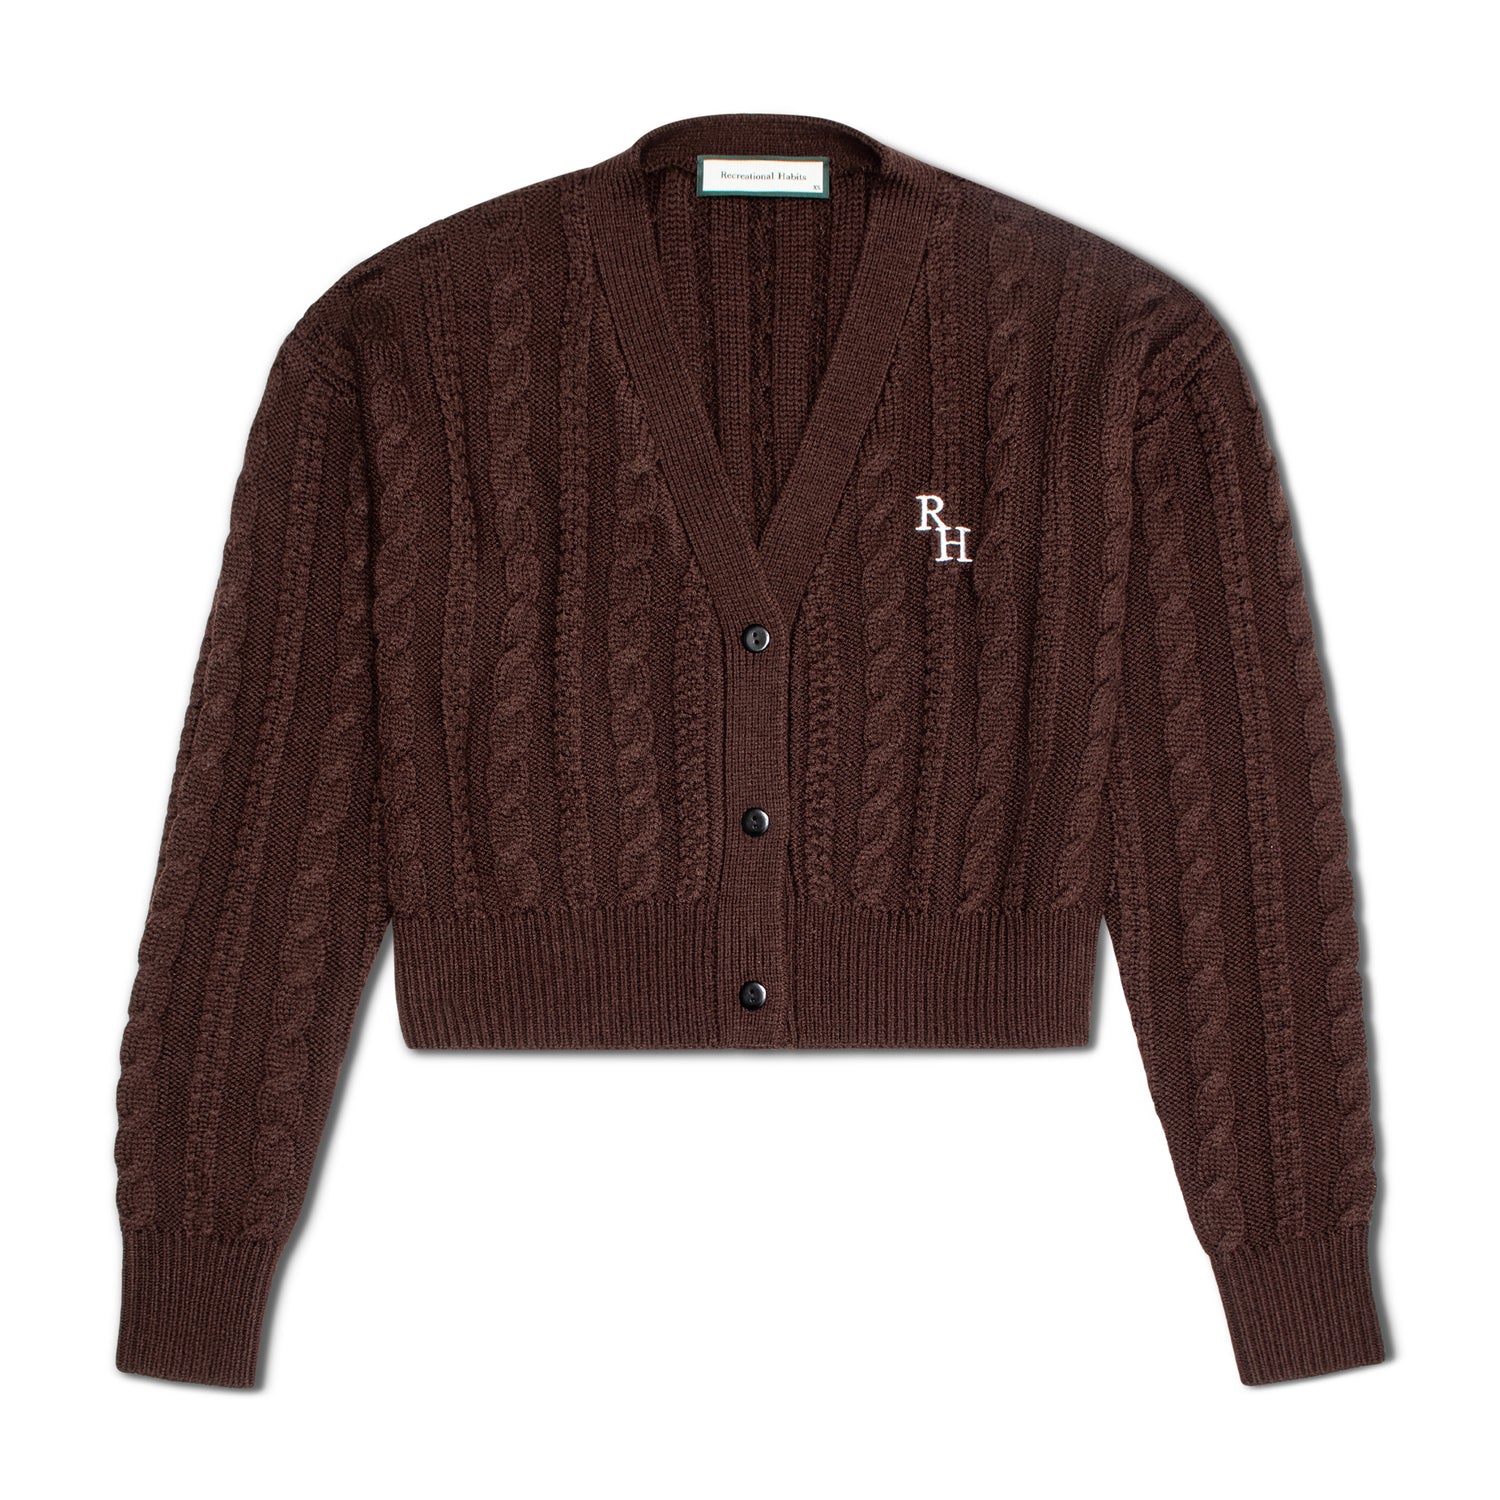 Wes Cable Knit Cardigan in Espresso